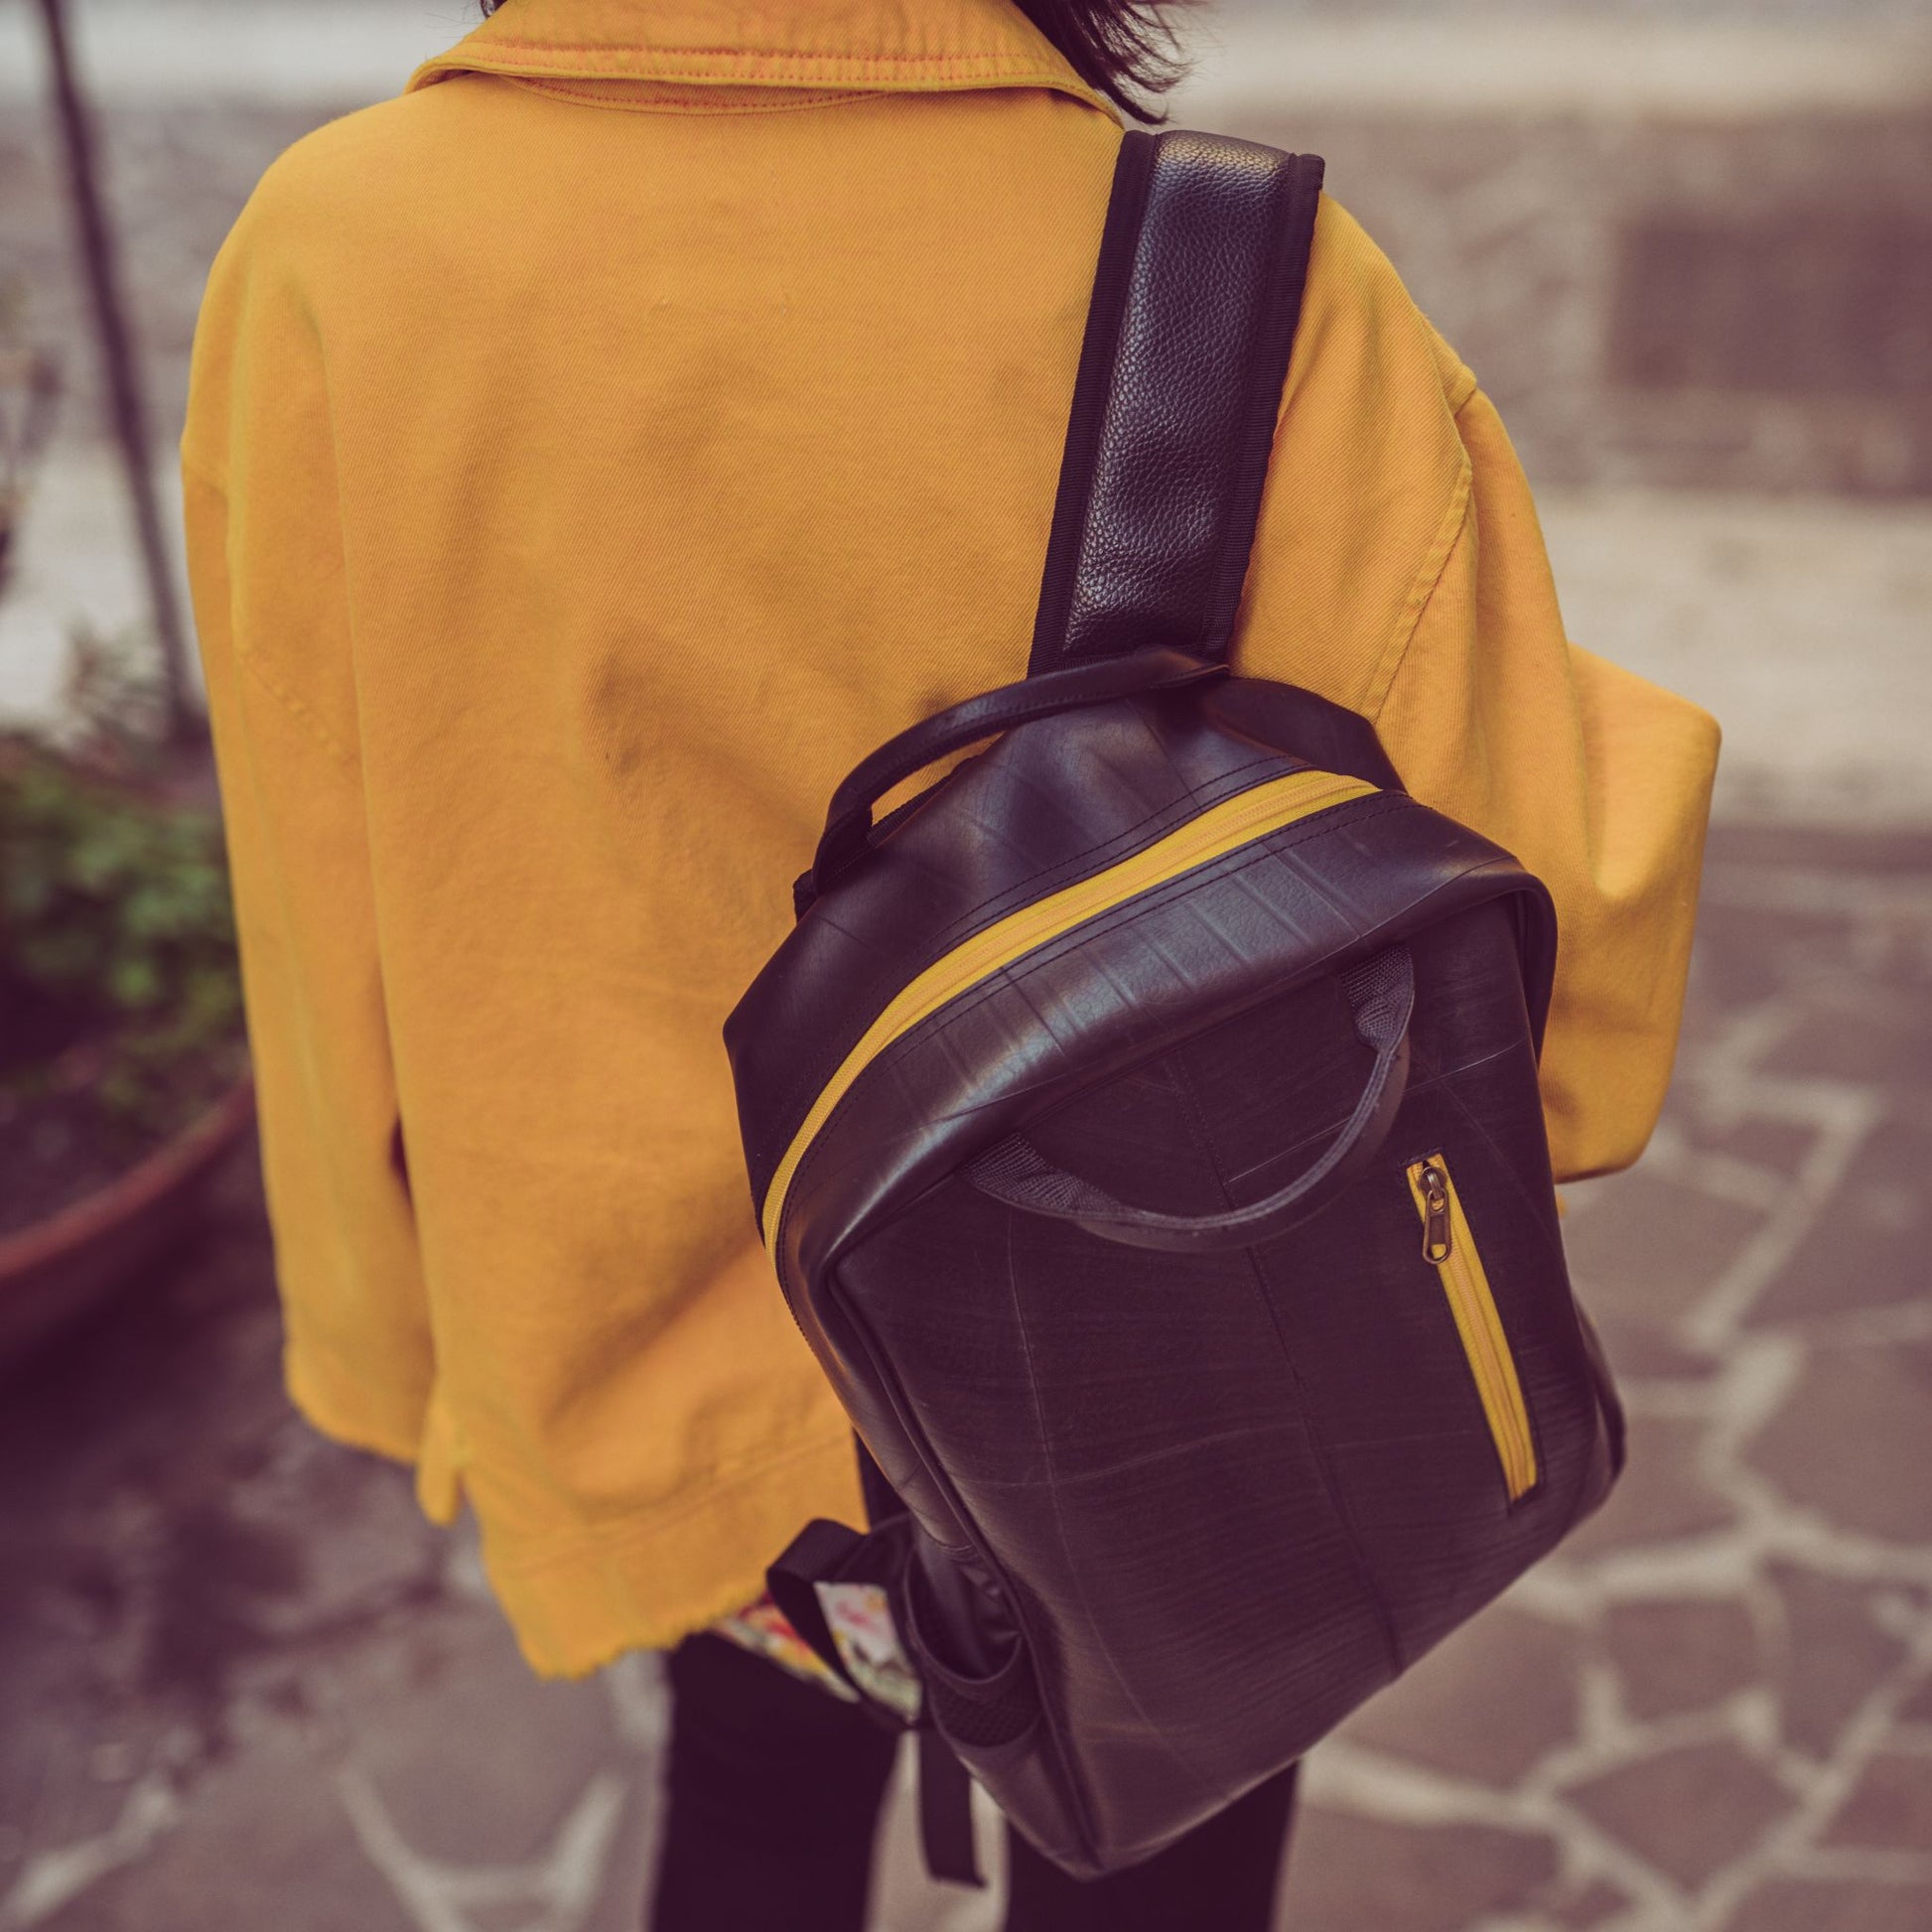 Hackney Backpack made from Recycled Materials - top on shoulder